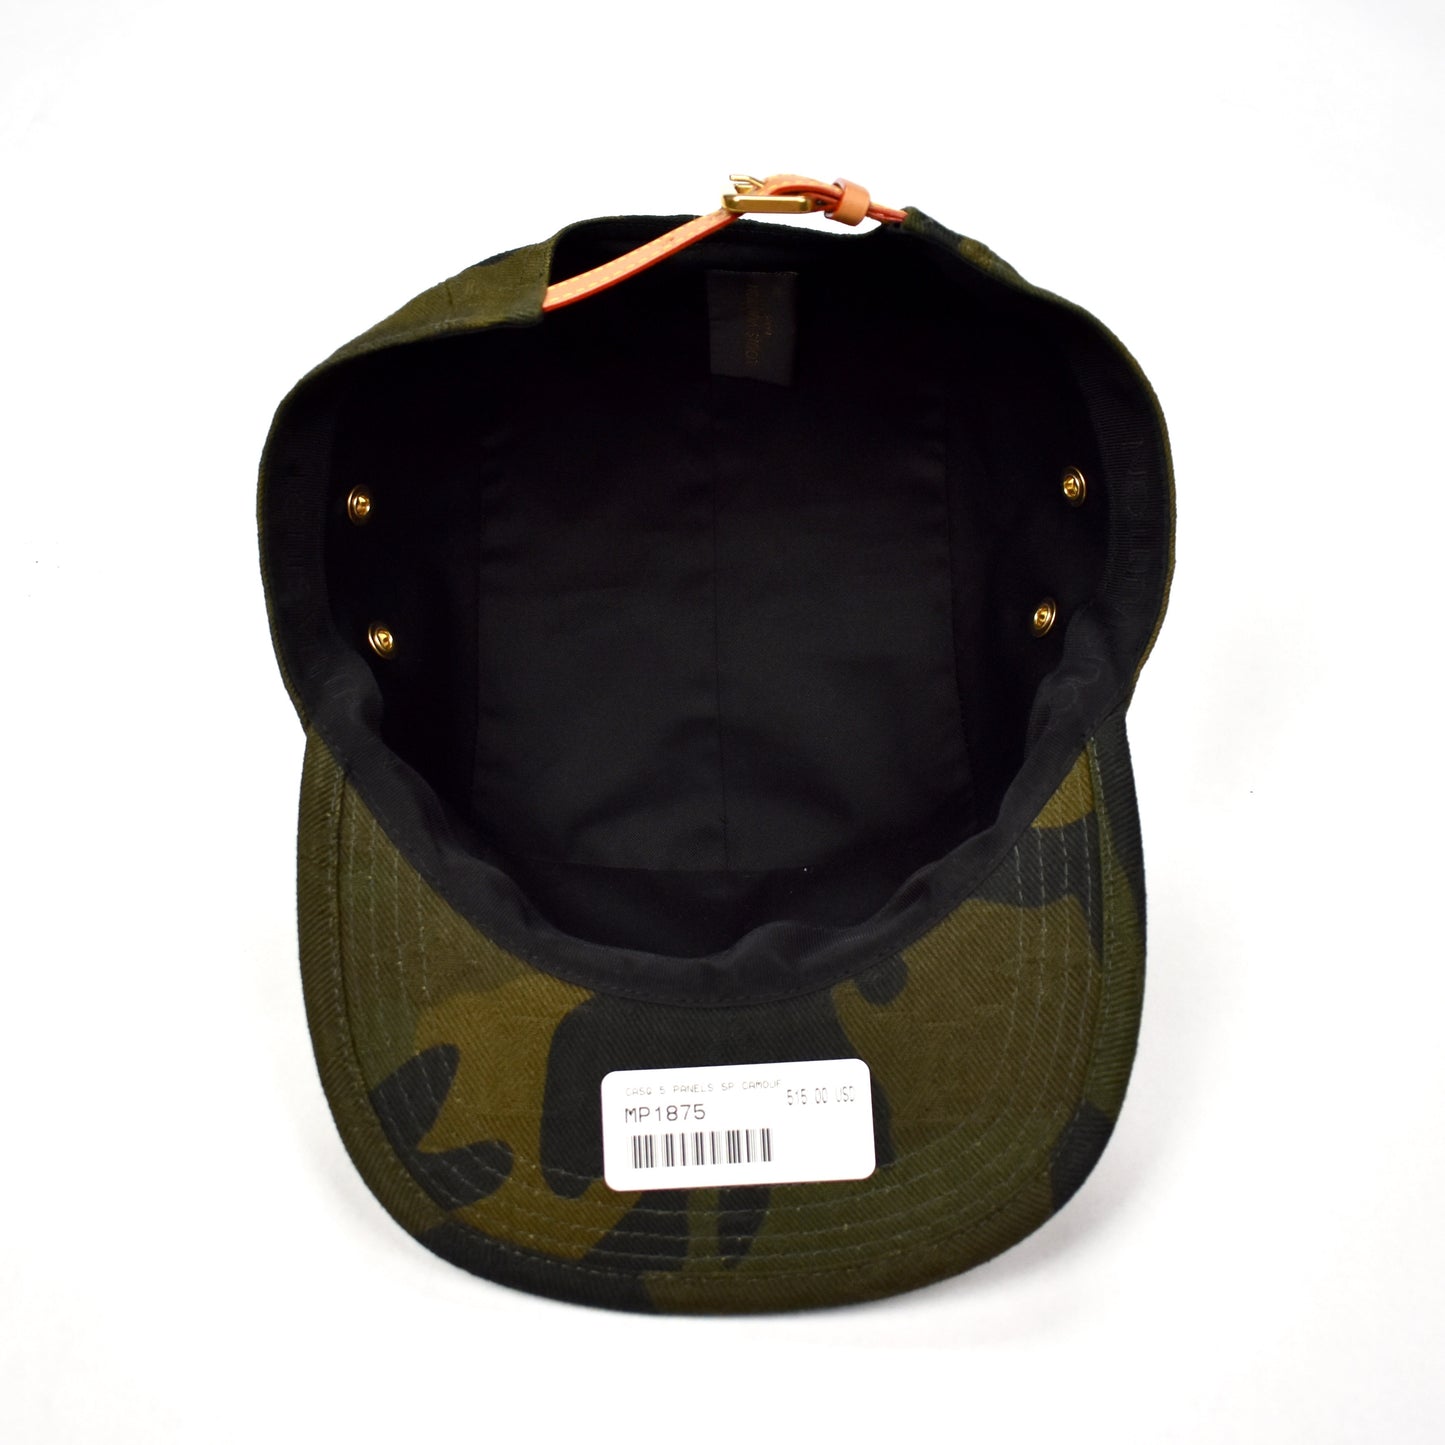 Supreme, Louis Vuitton Camp Cap Camo Available For Immediate Sale At  Sotheby's